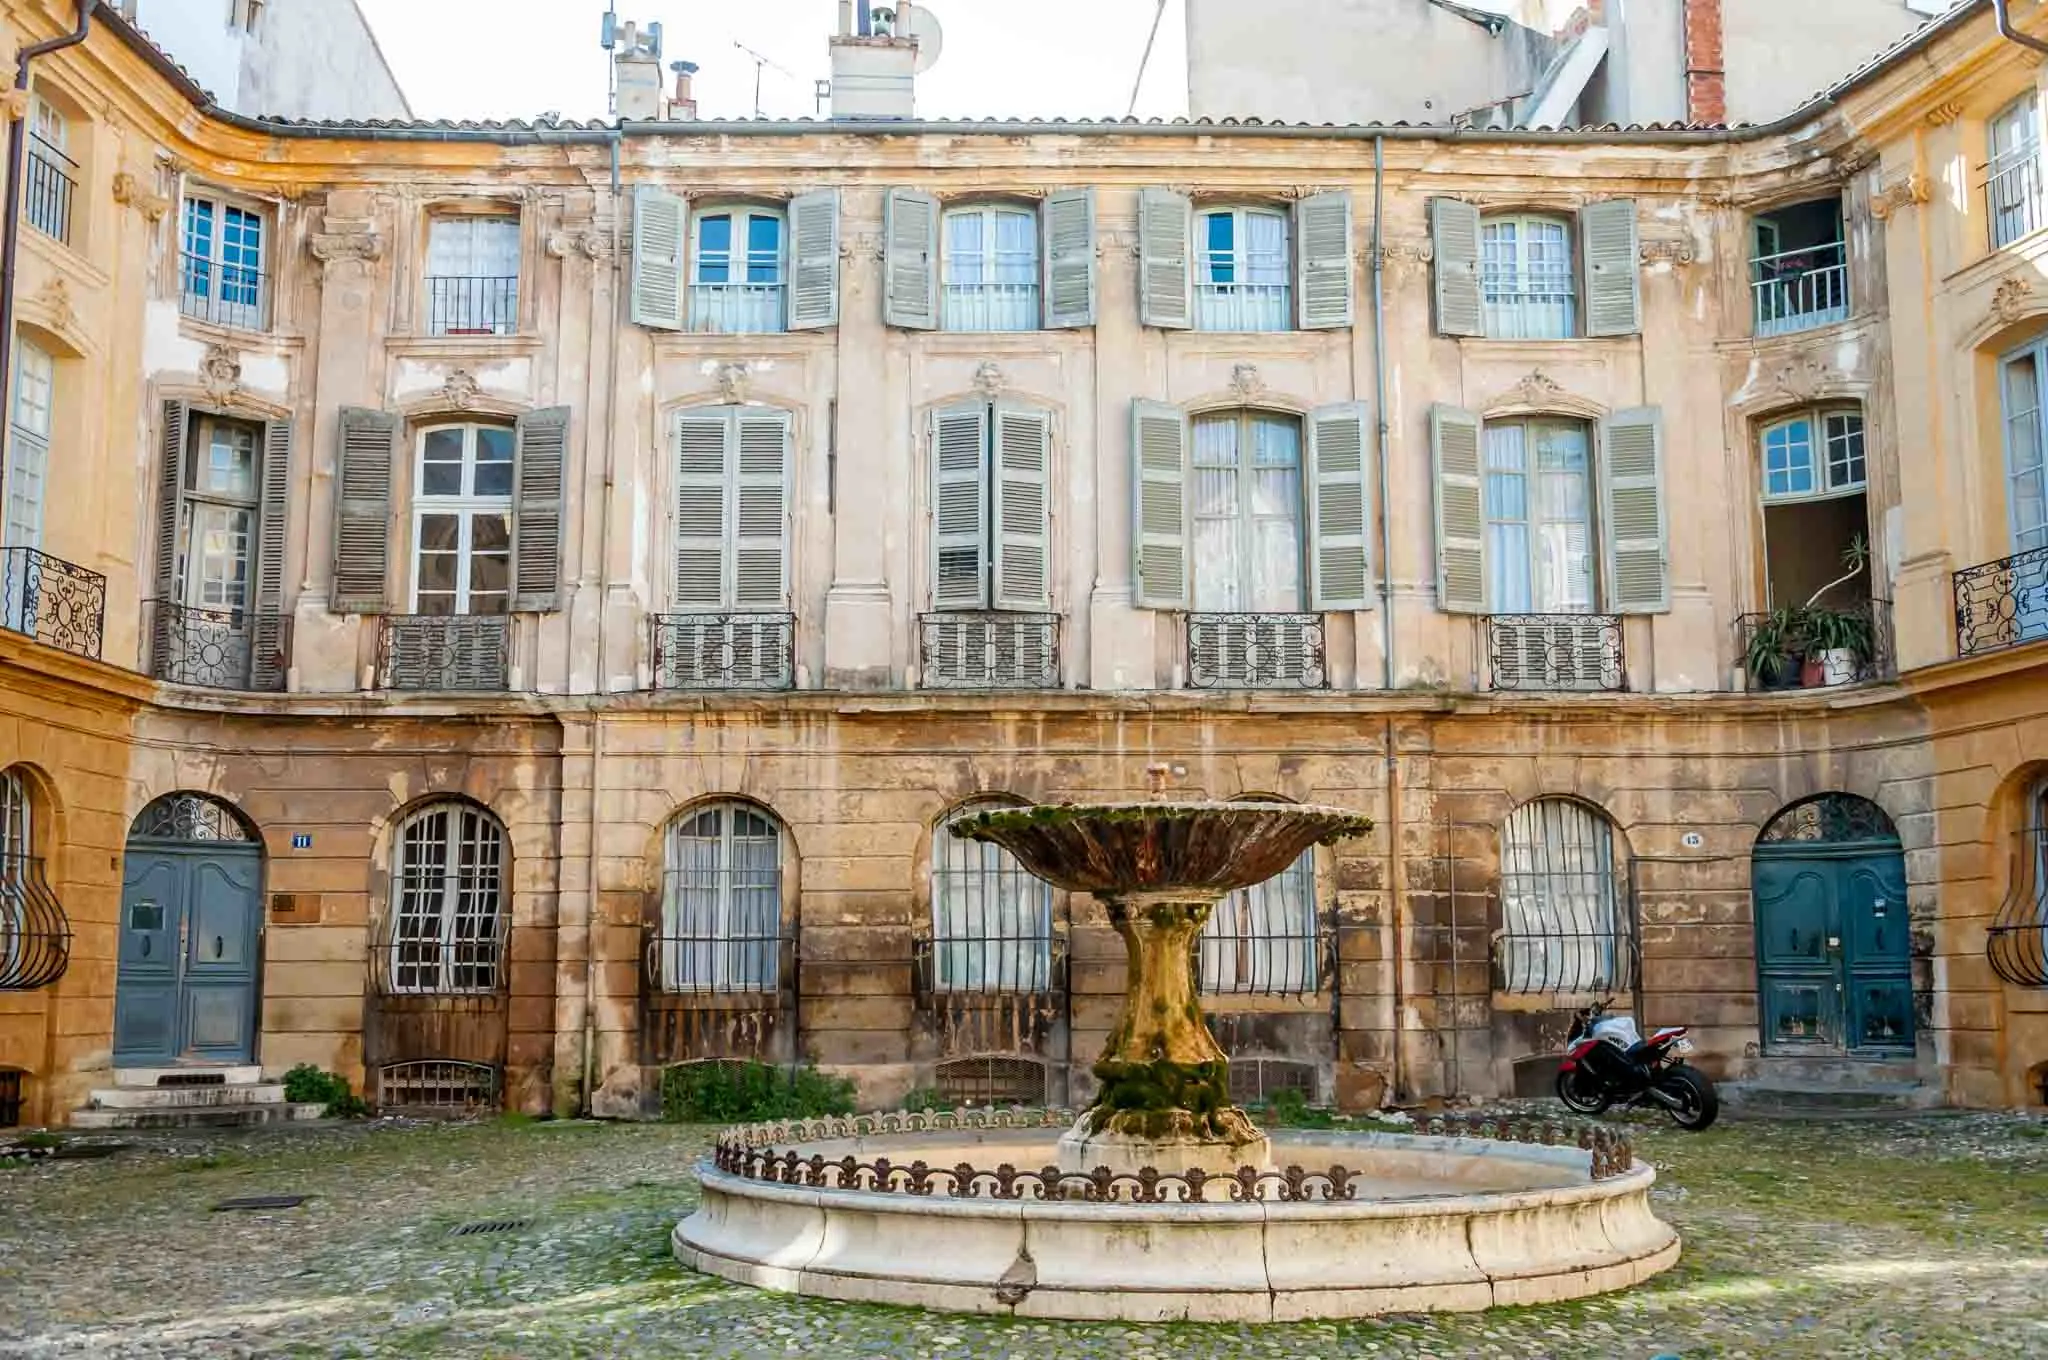 Fountain in a courtyard surrounded by buildings in Aix-en-Provence France